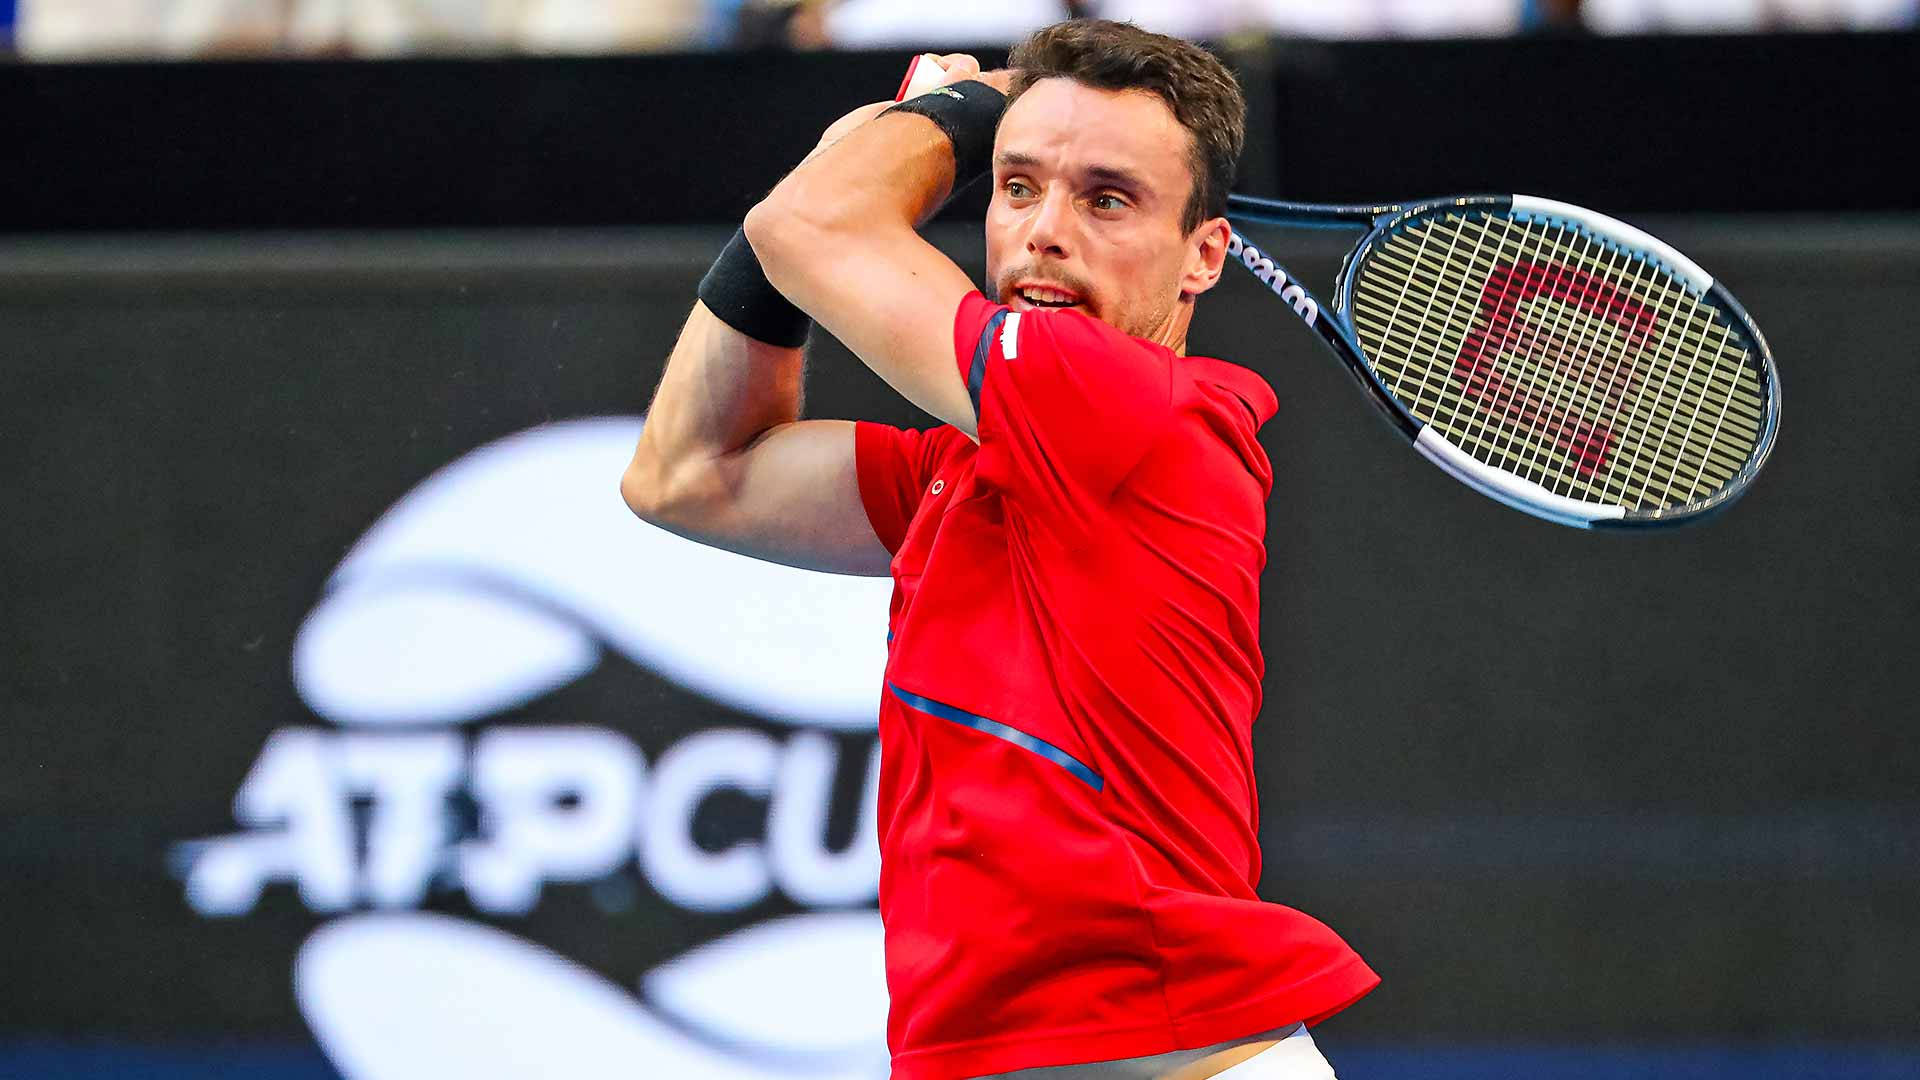 Roberto Bautista Agut wearing his iconic red jersey during a tennis match. Wallpaper